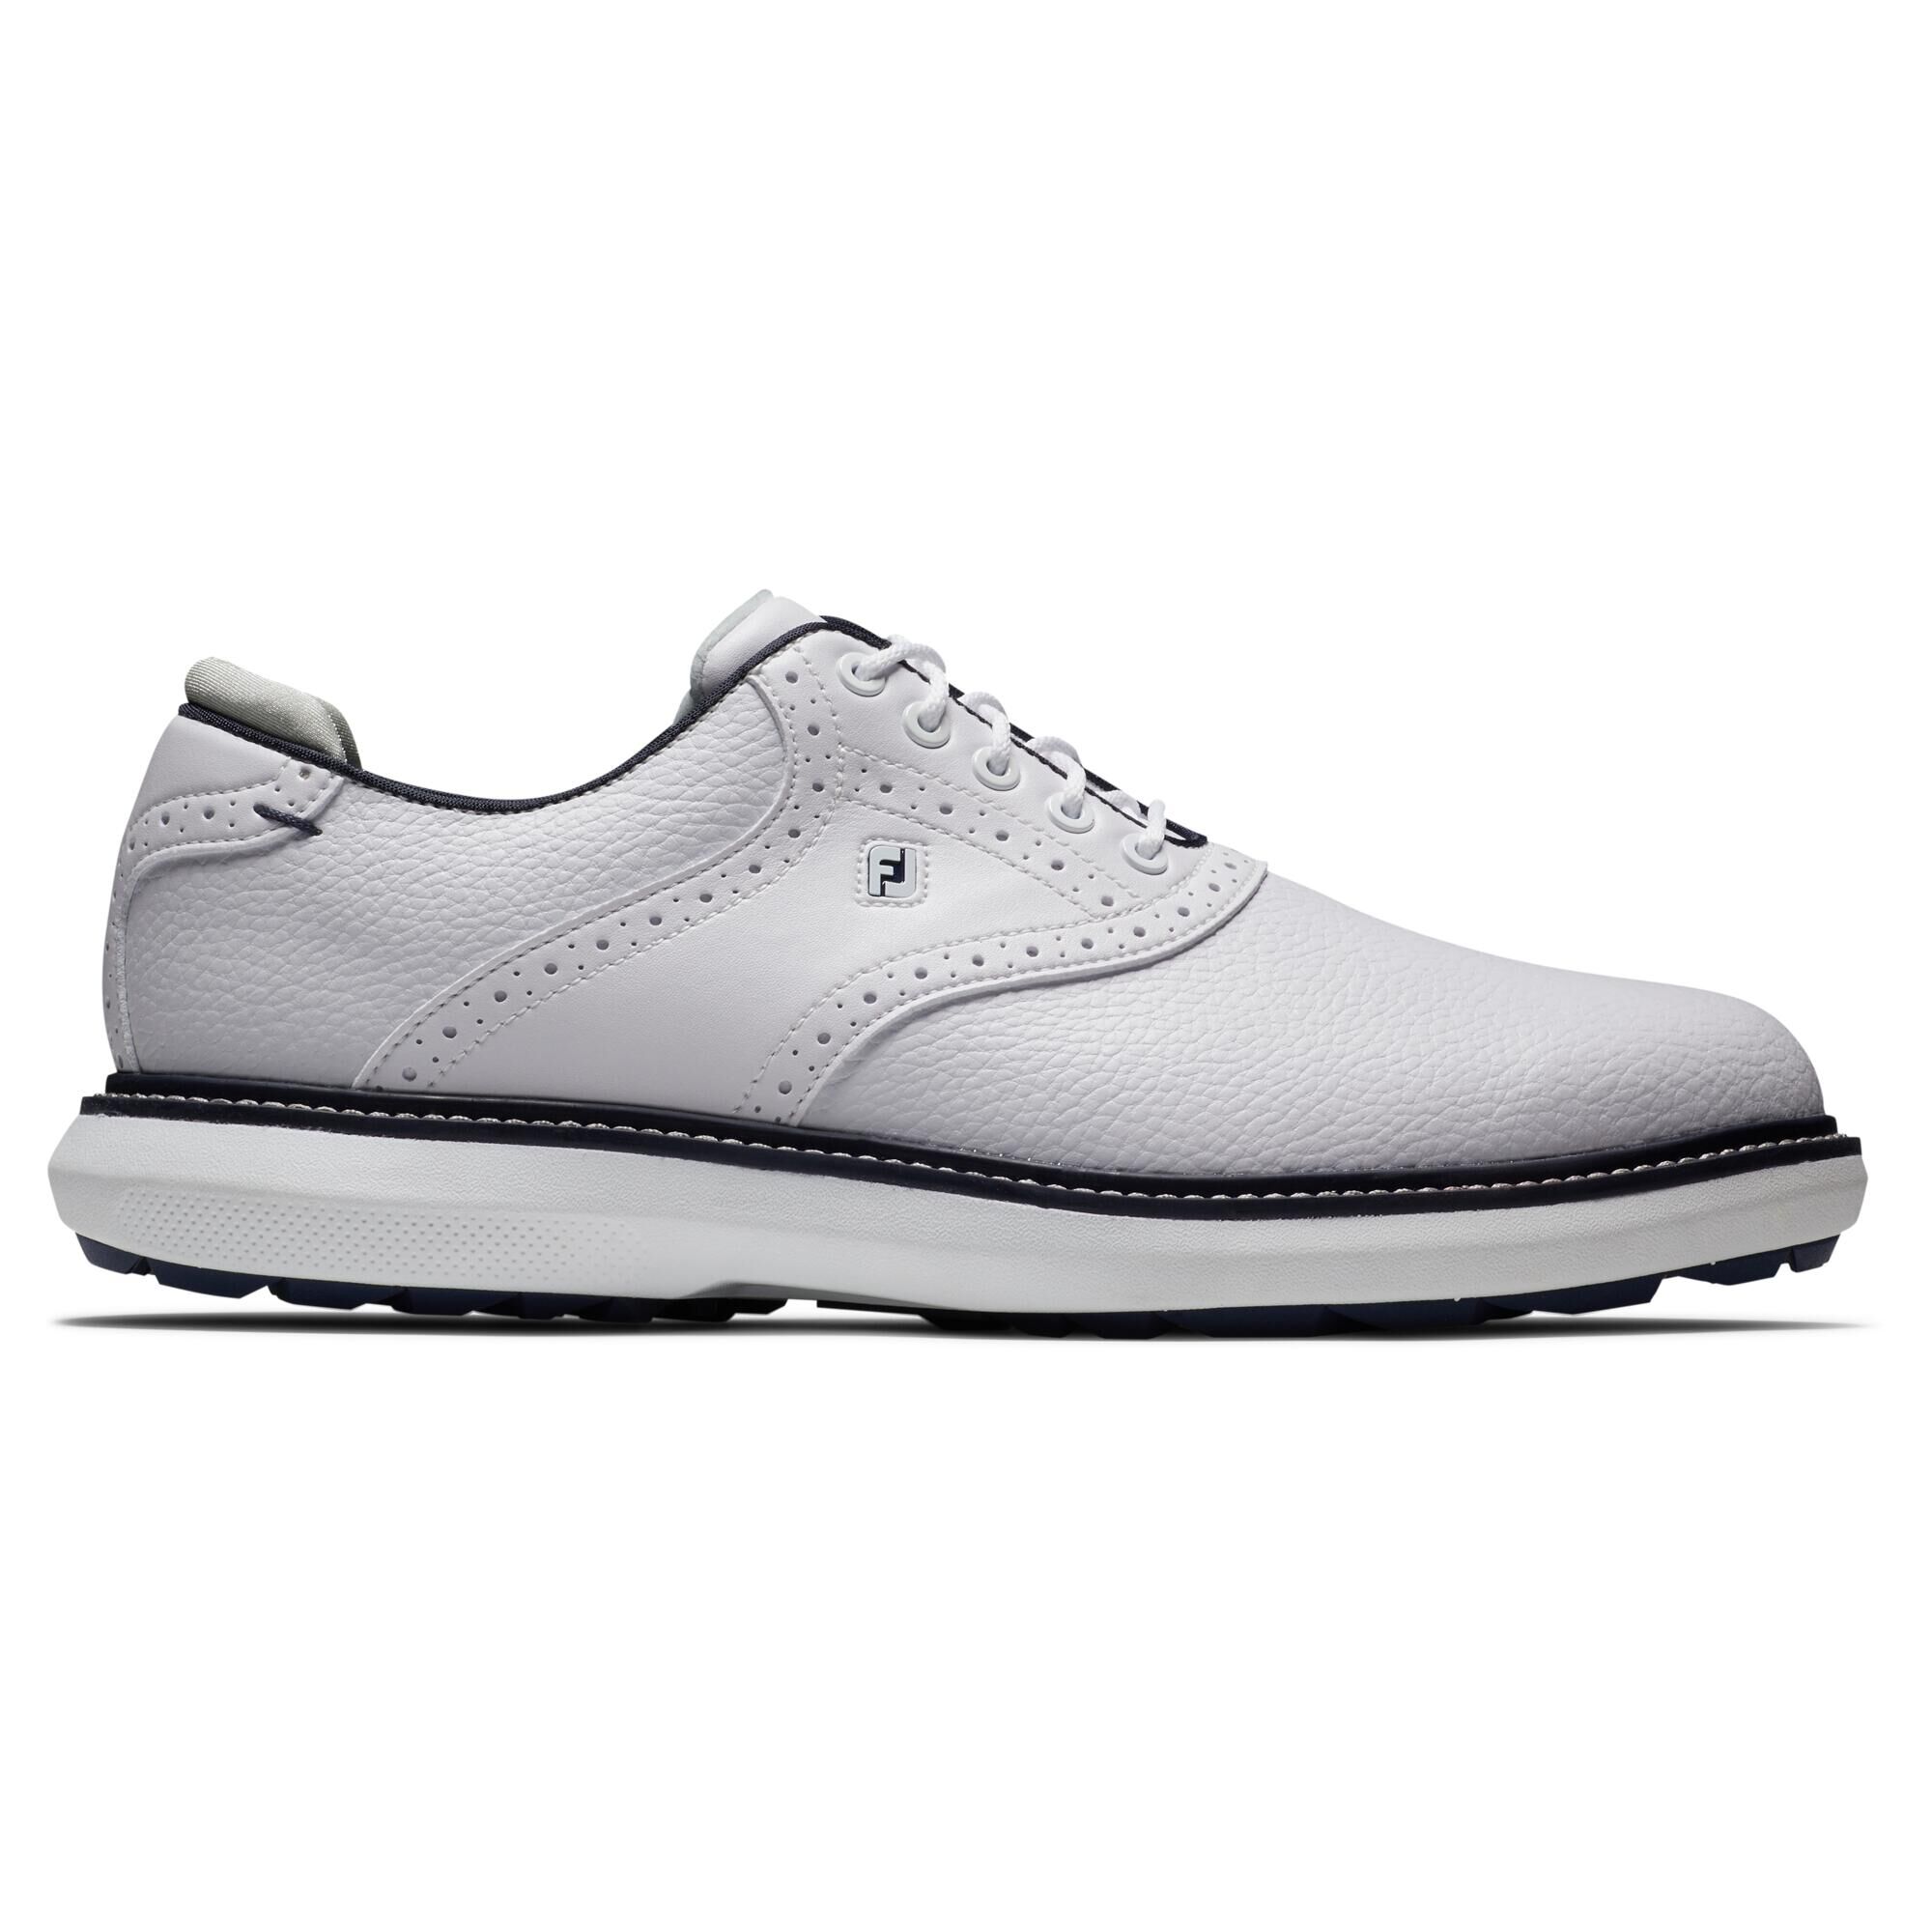 FOOTJOY Men's golf spikeless shoes Footjoy - Traditions white